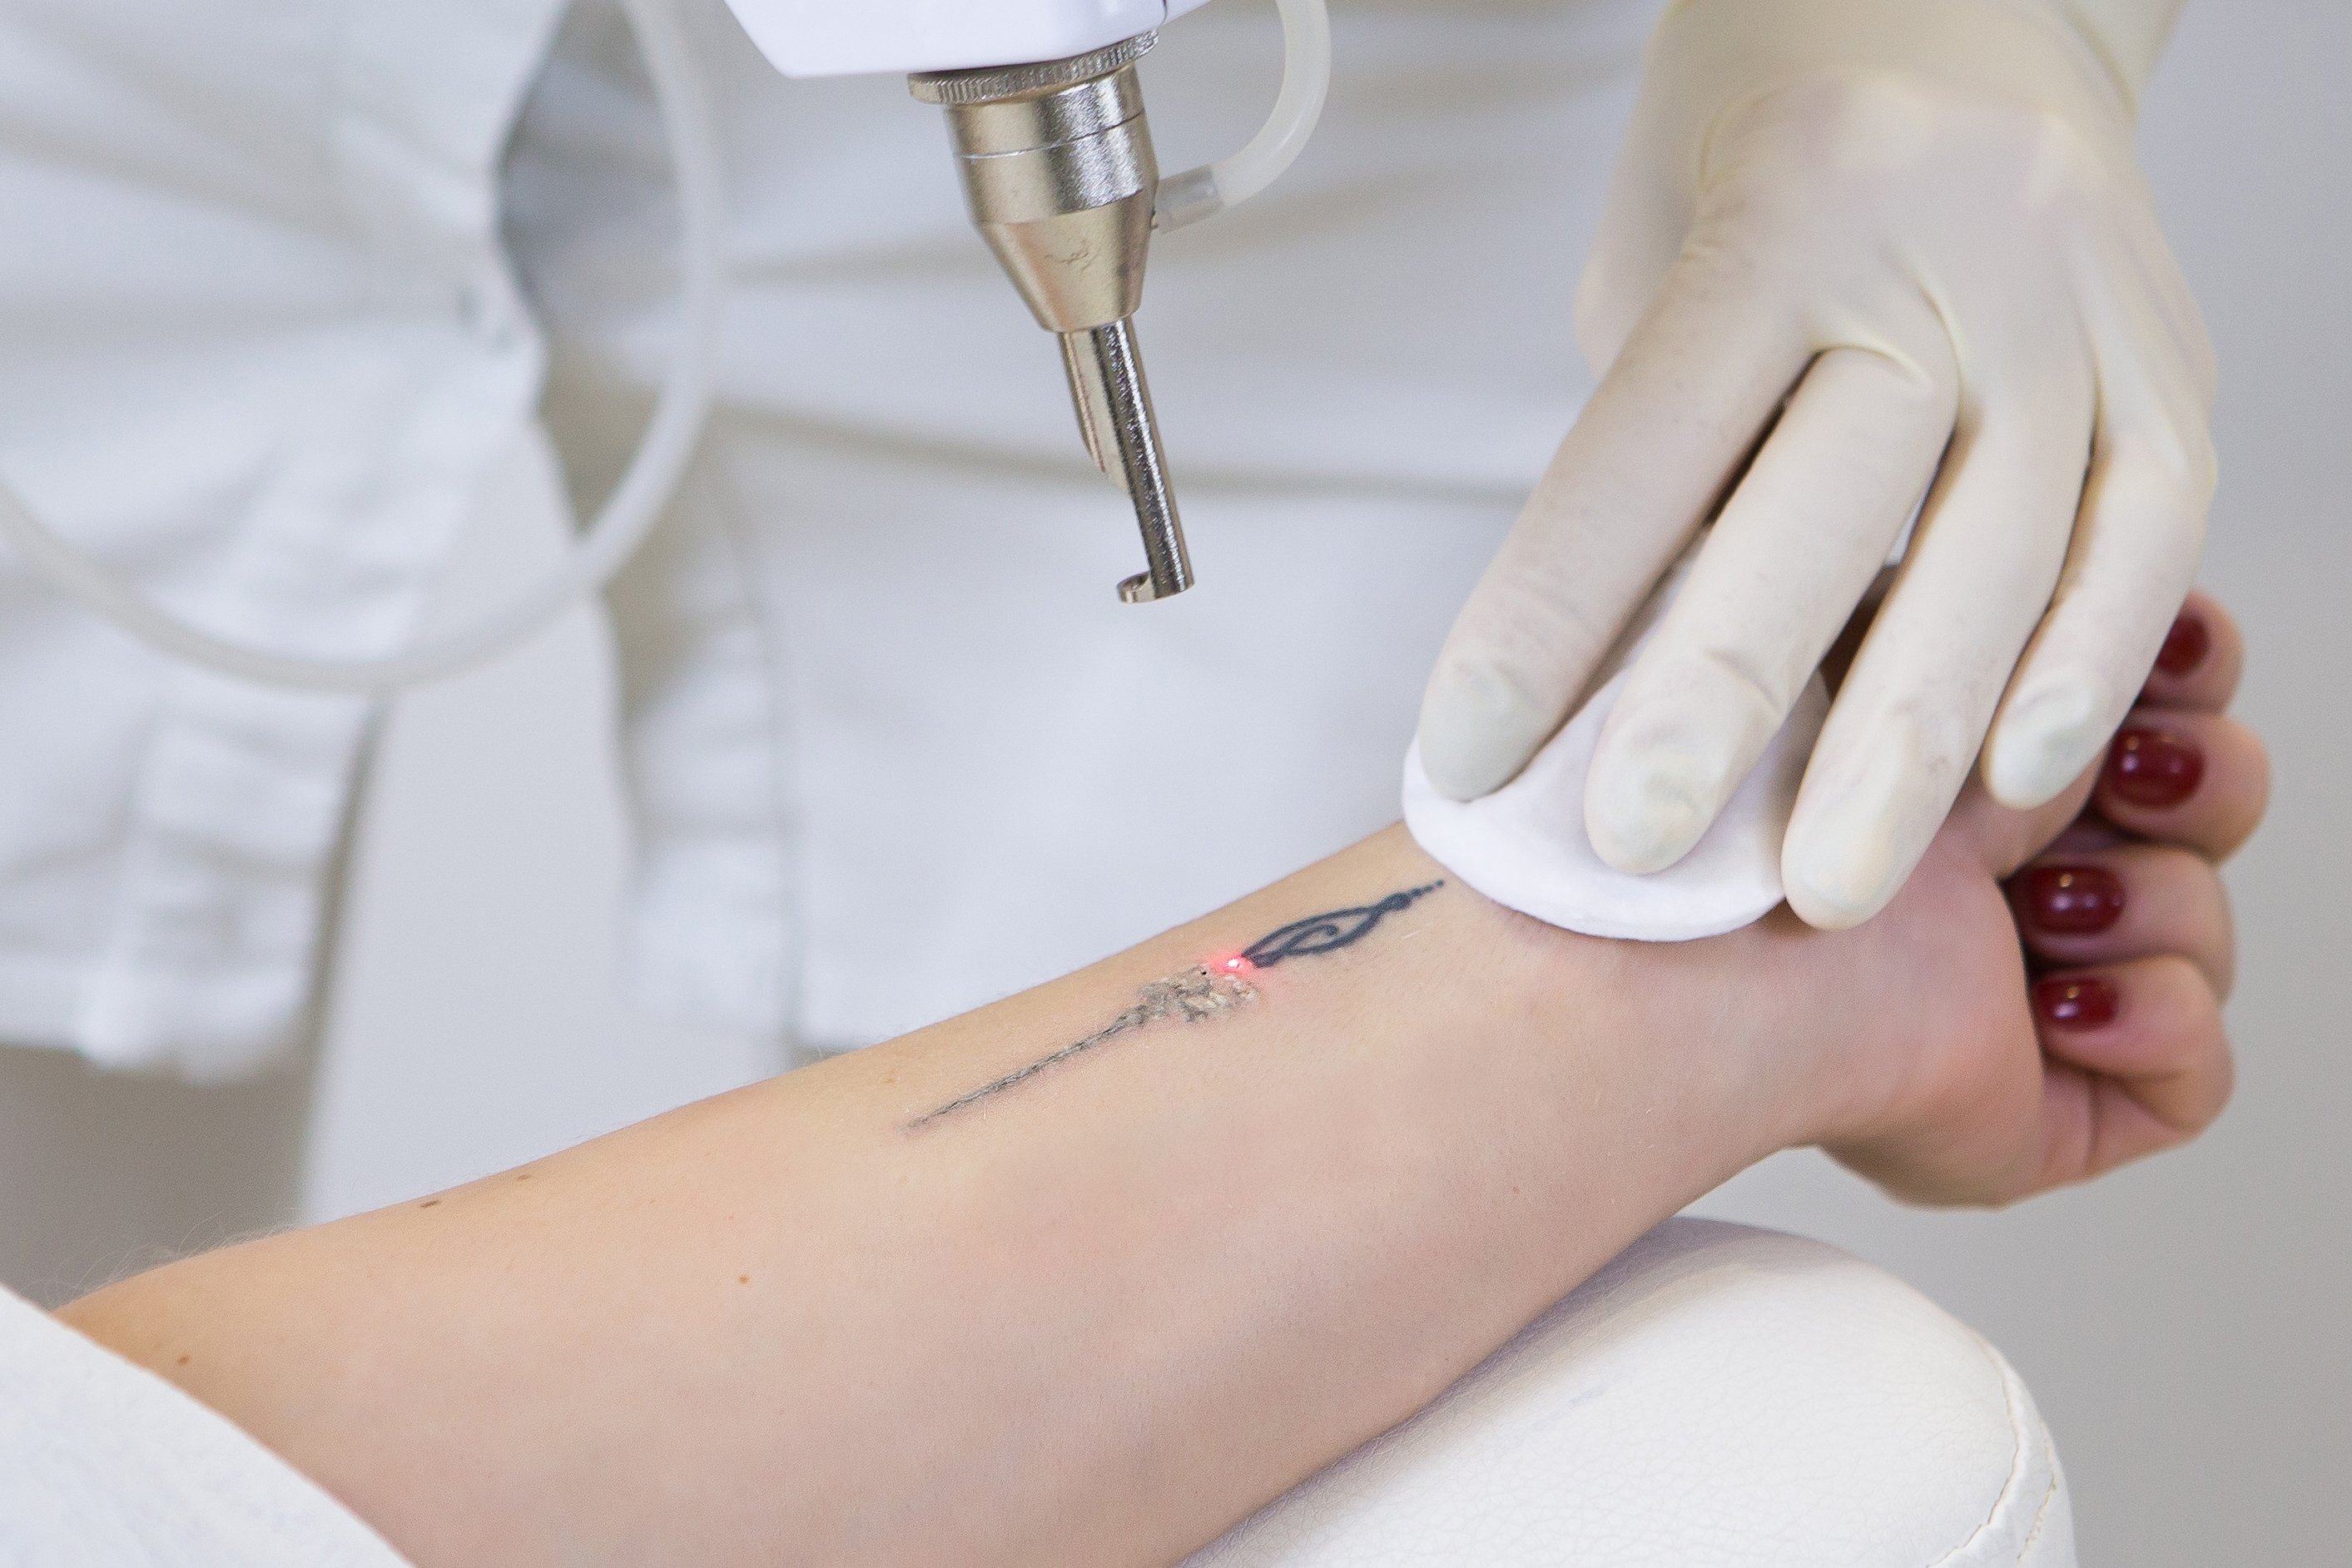 No way back? Tattoo removal is painful but possible | Daily Sabah